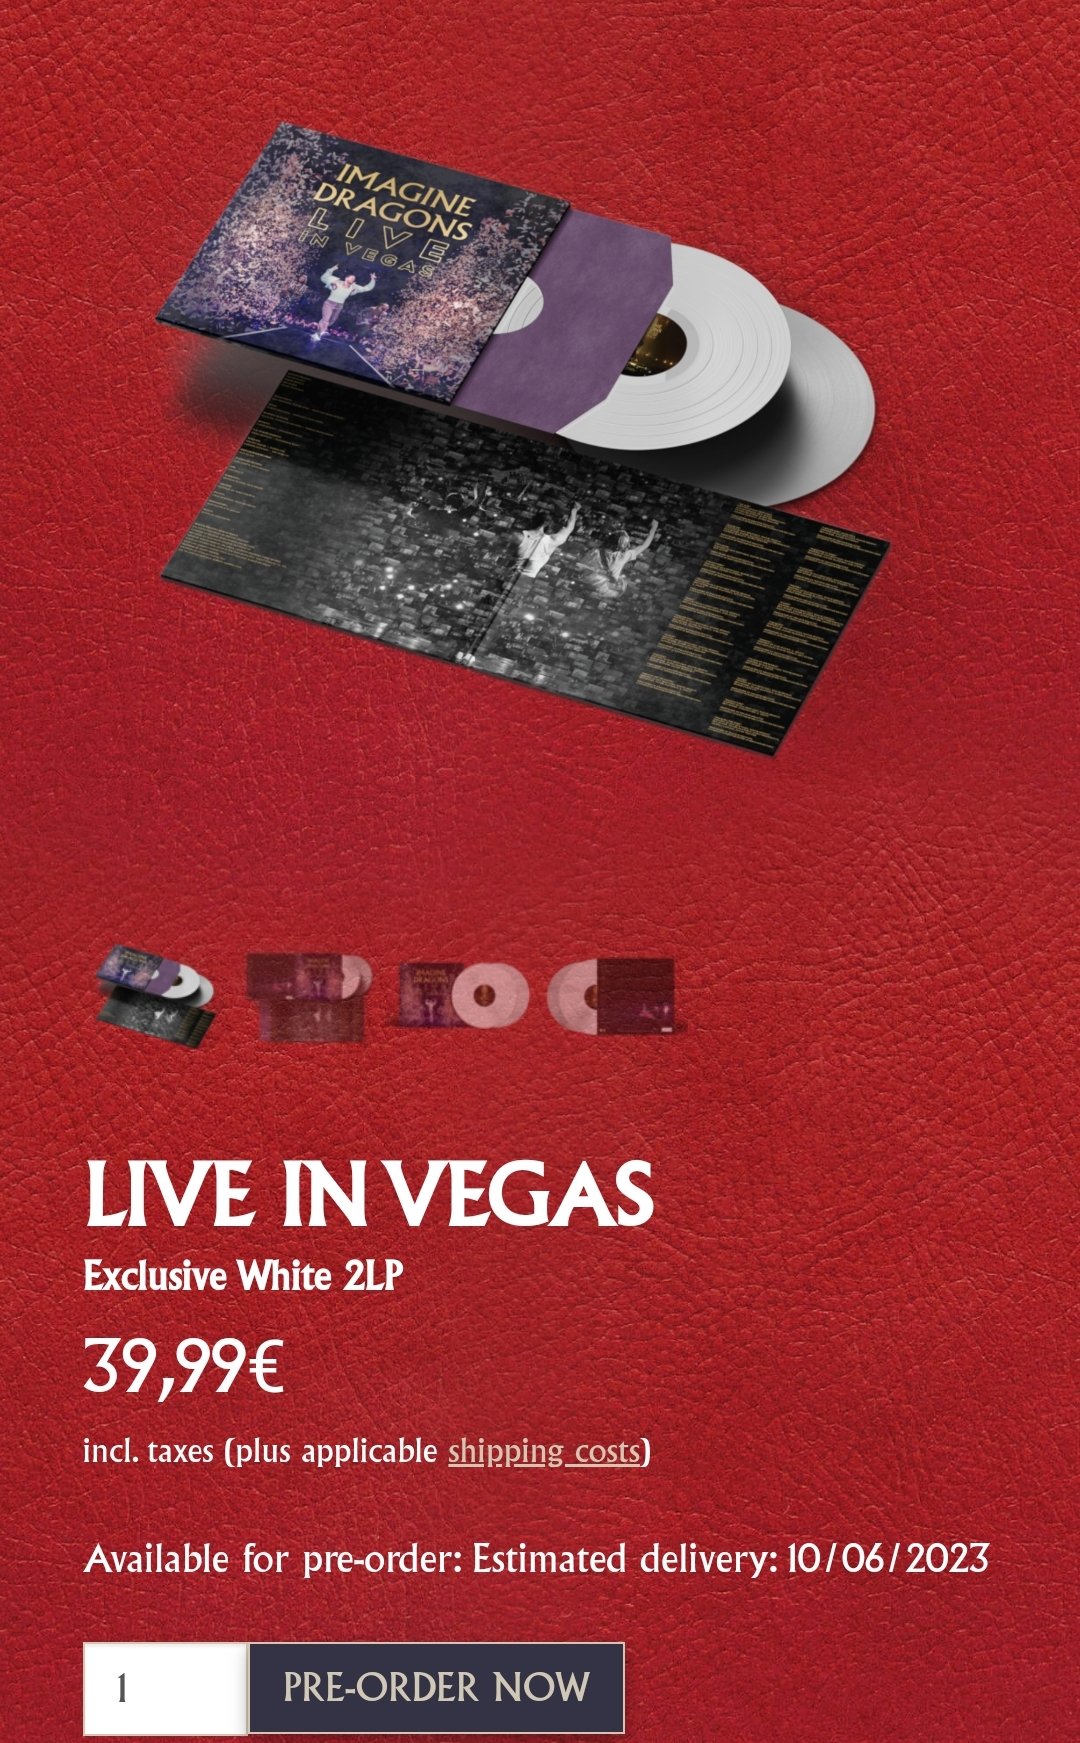 Imagine Dragons Netherlands on X: NEWS  Imagine Dragons Live in Vegas  will be released on Vinyl  / X